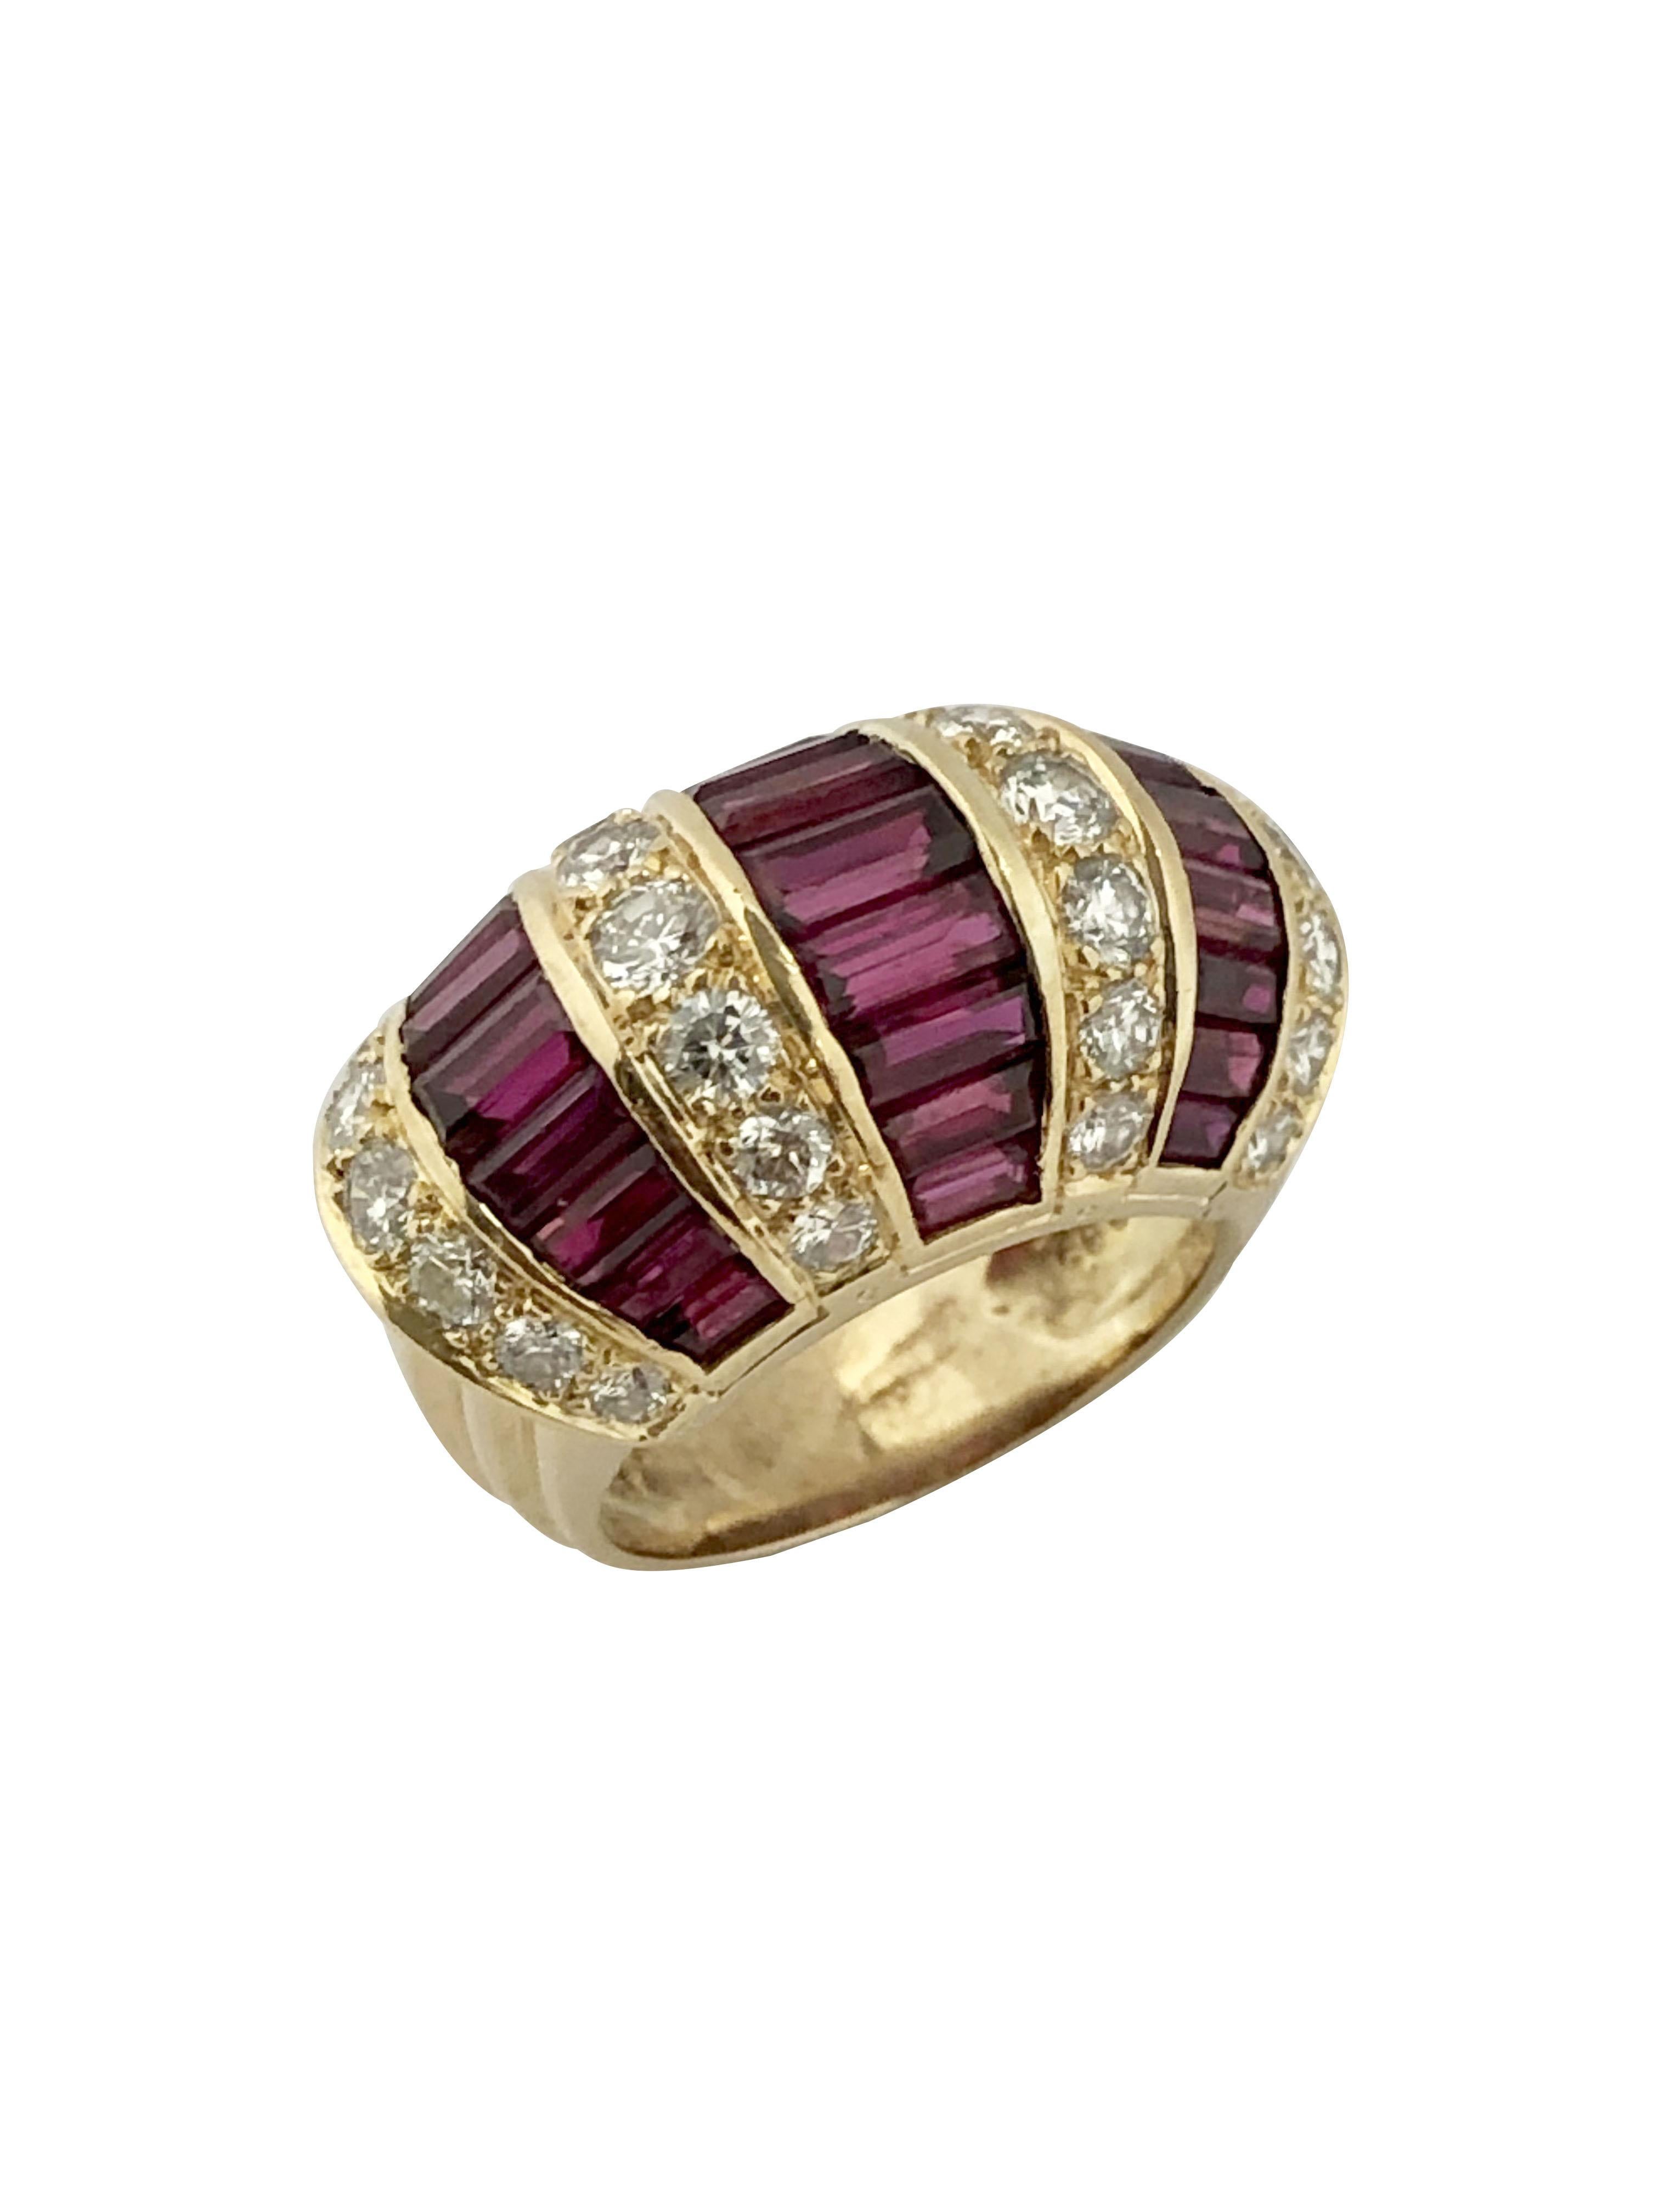 Baguette Cut Oscar Heyman Large Yellow Gold Ruby and Diamond Cocktail Ring